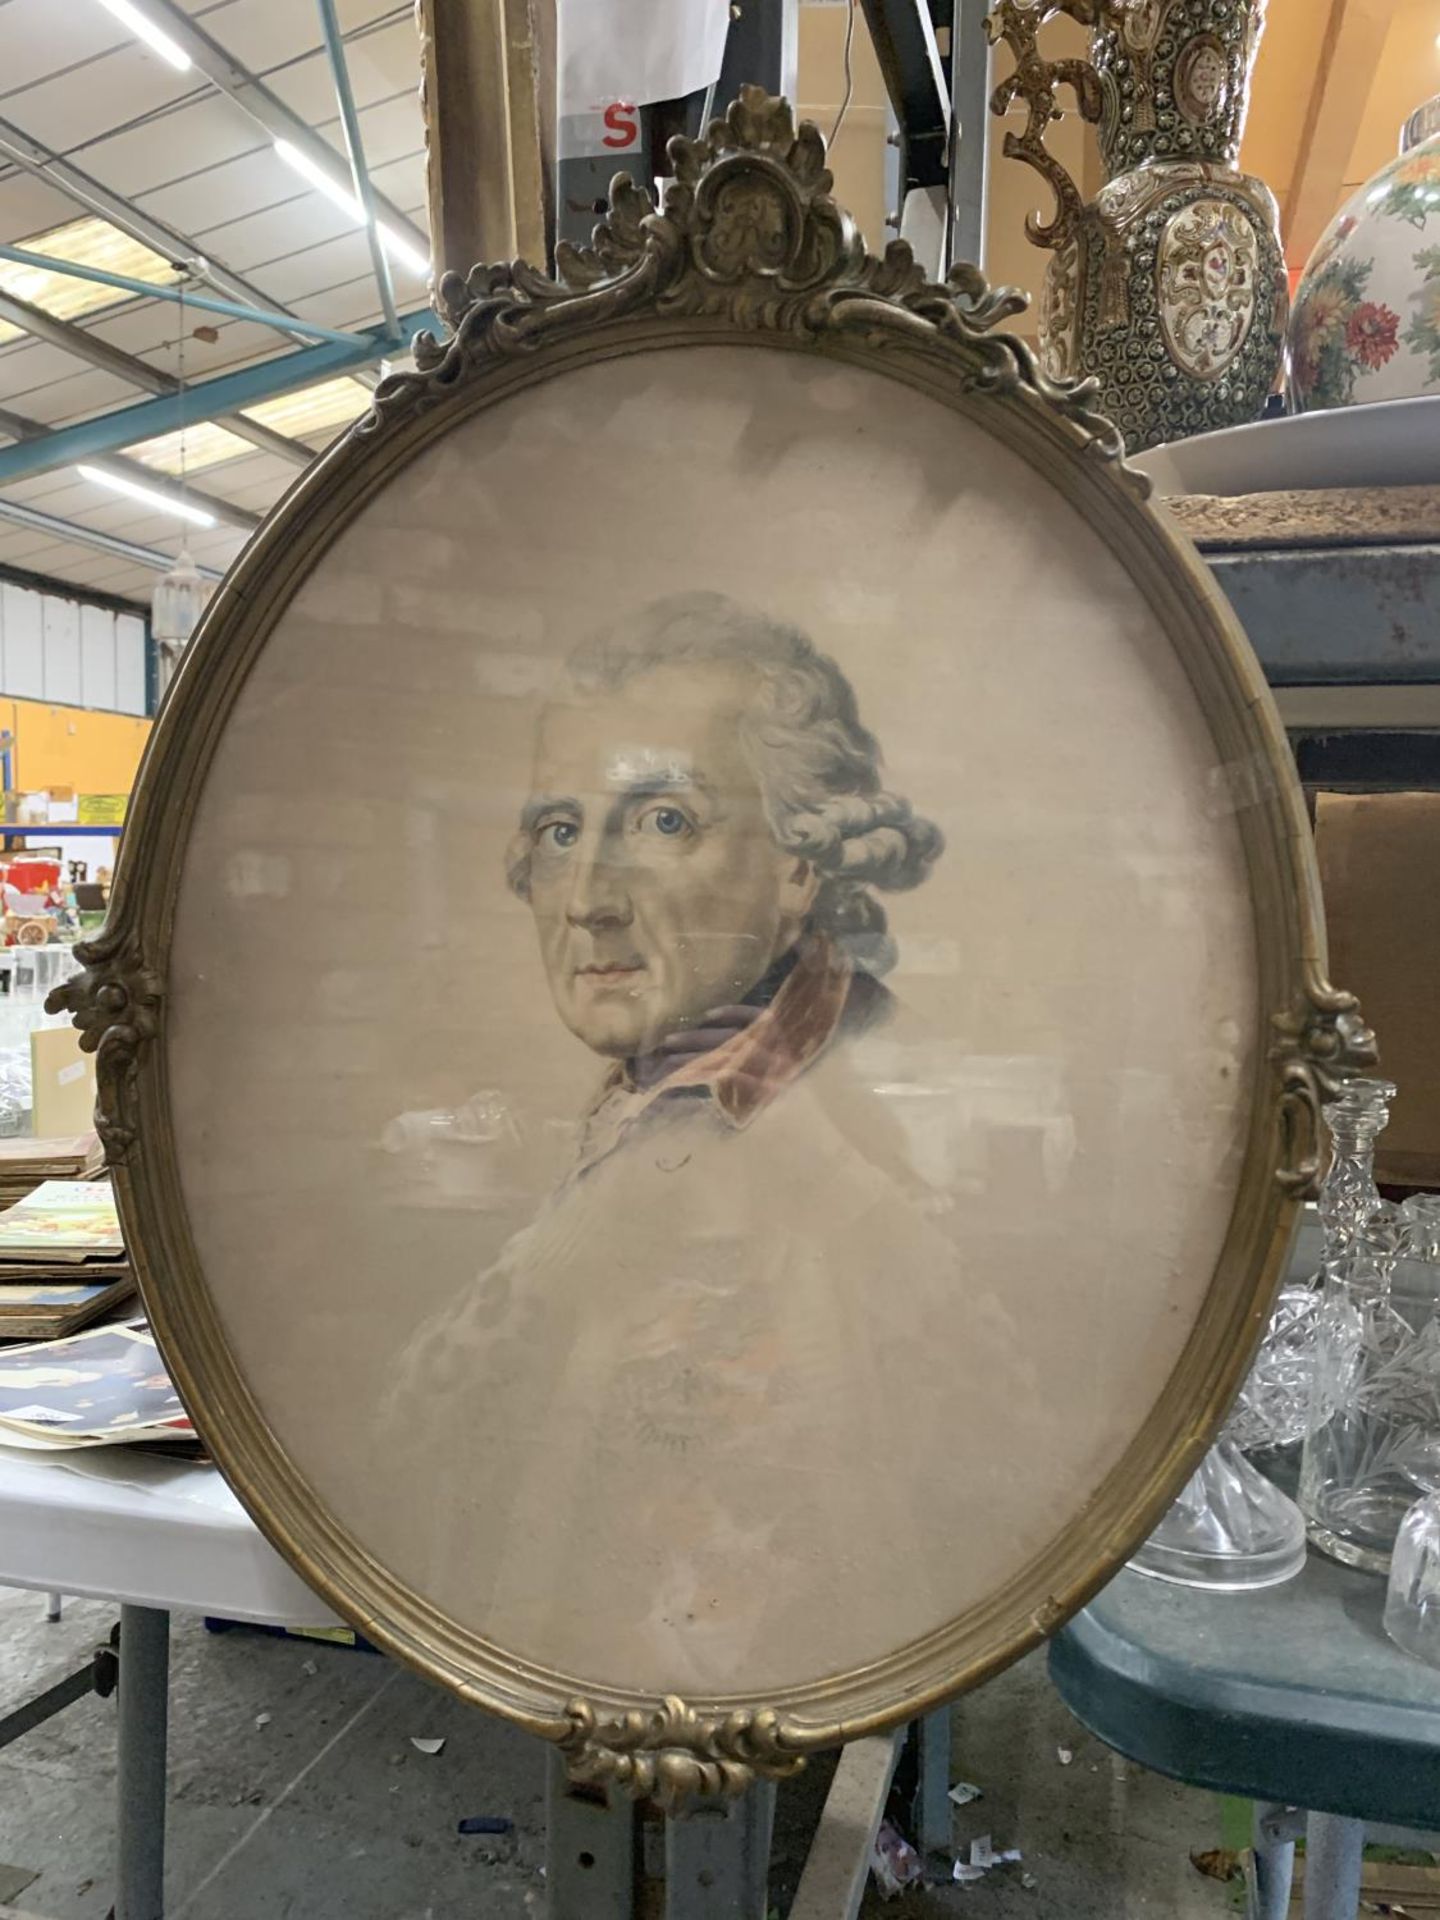 A OVAL FRAMED PRINT OF "FREDERICK THE GREAT"